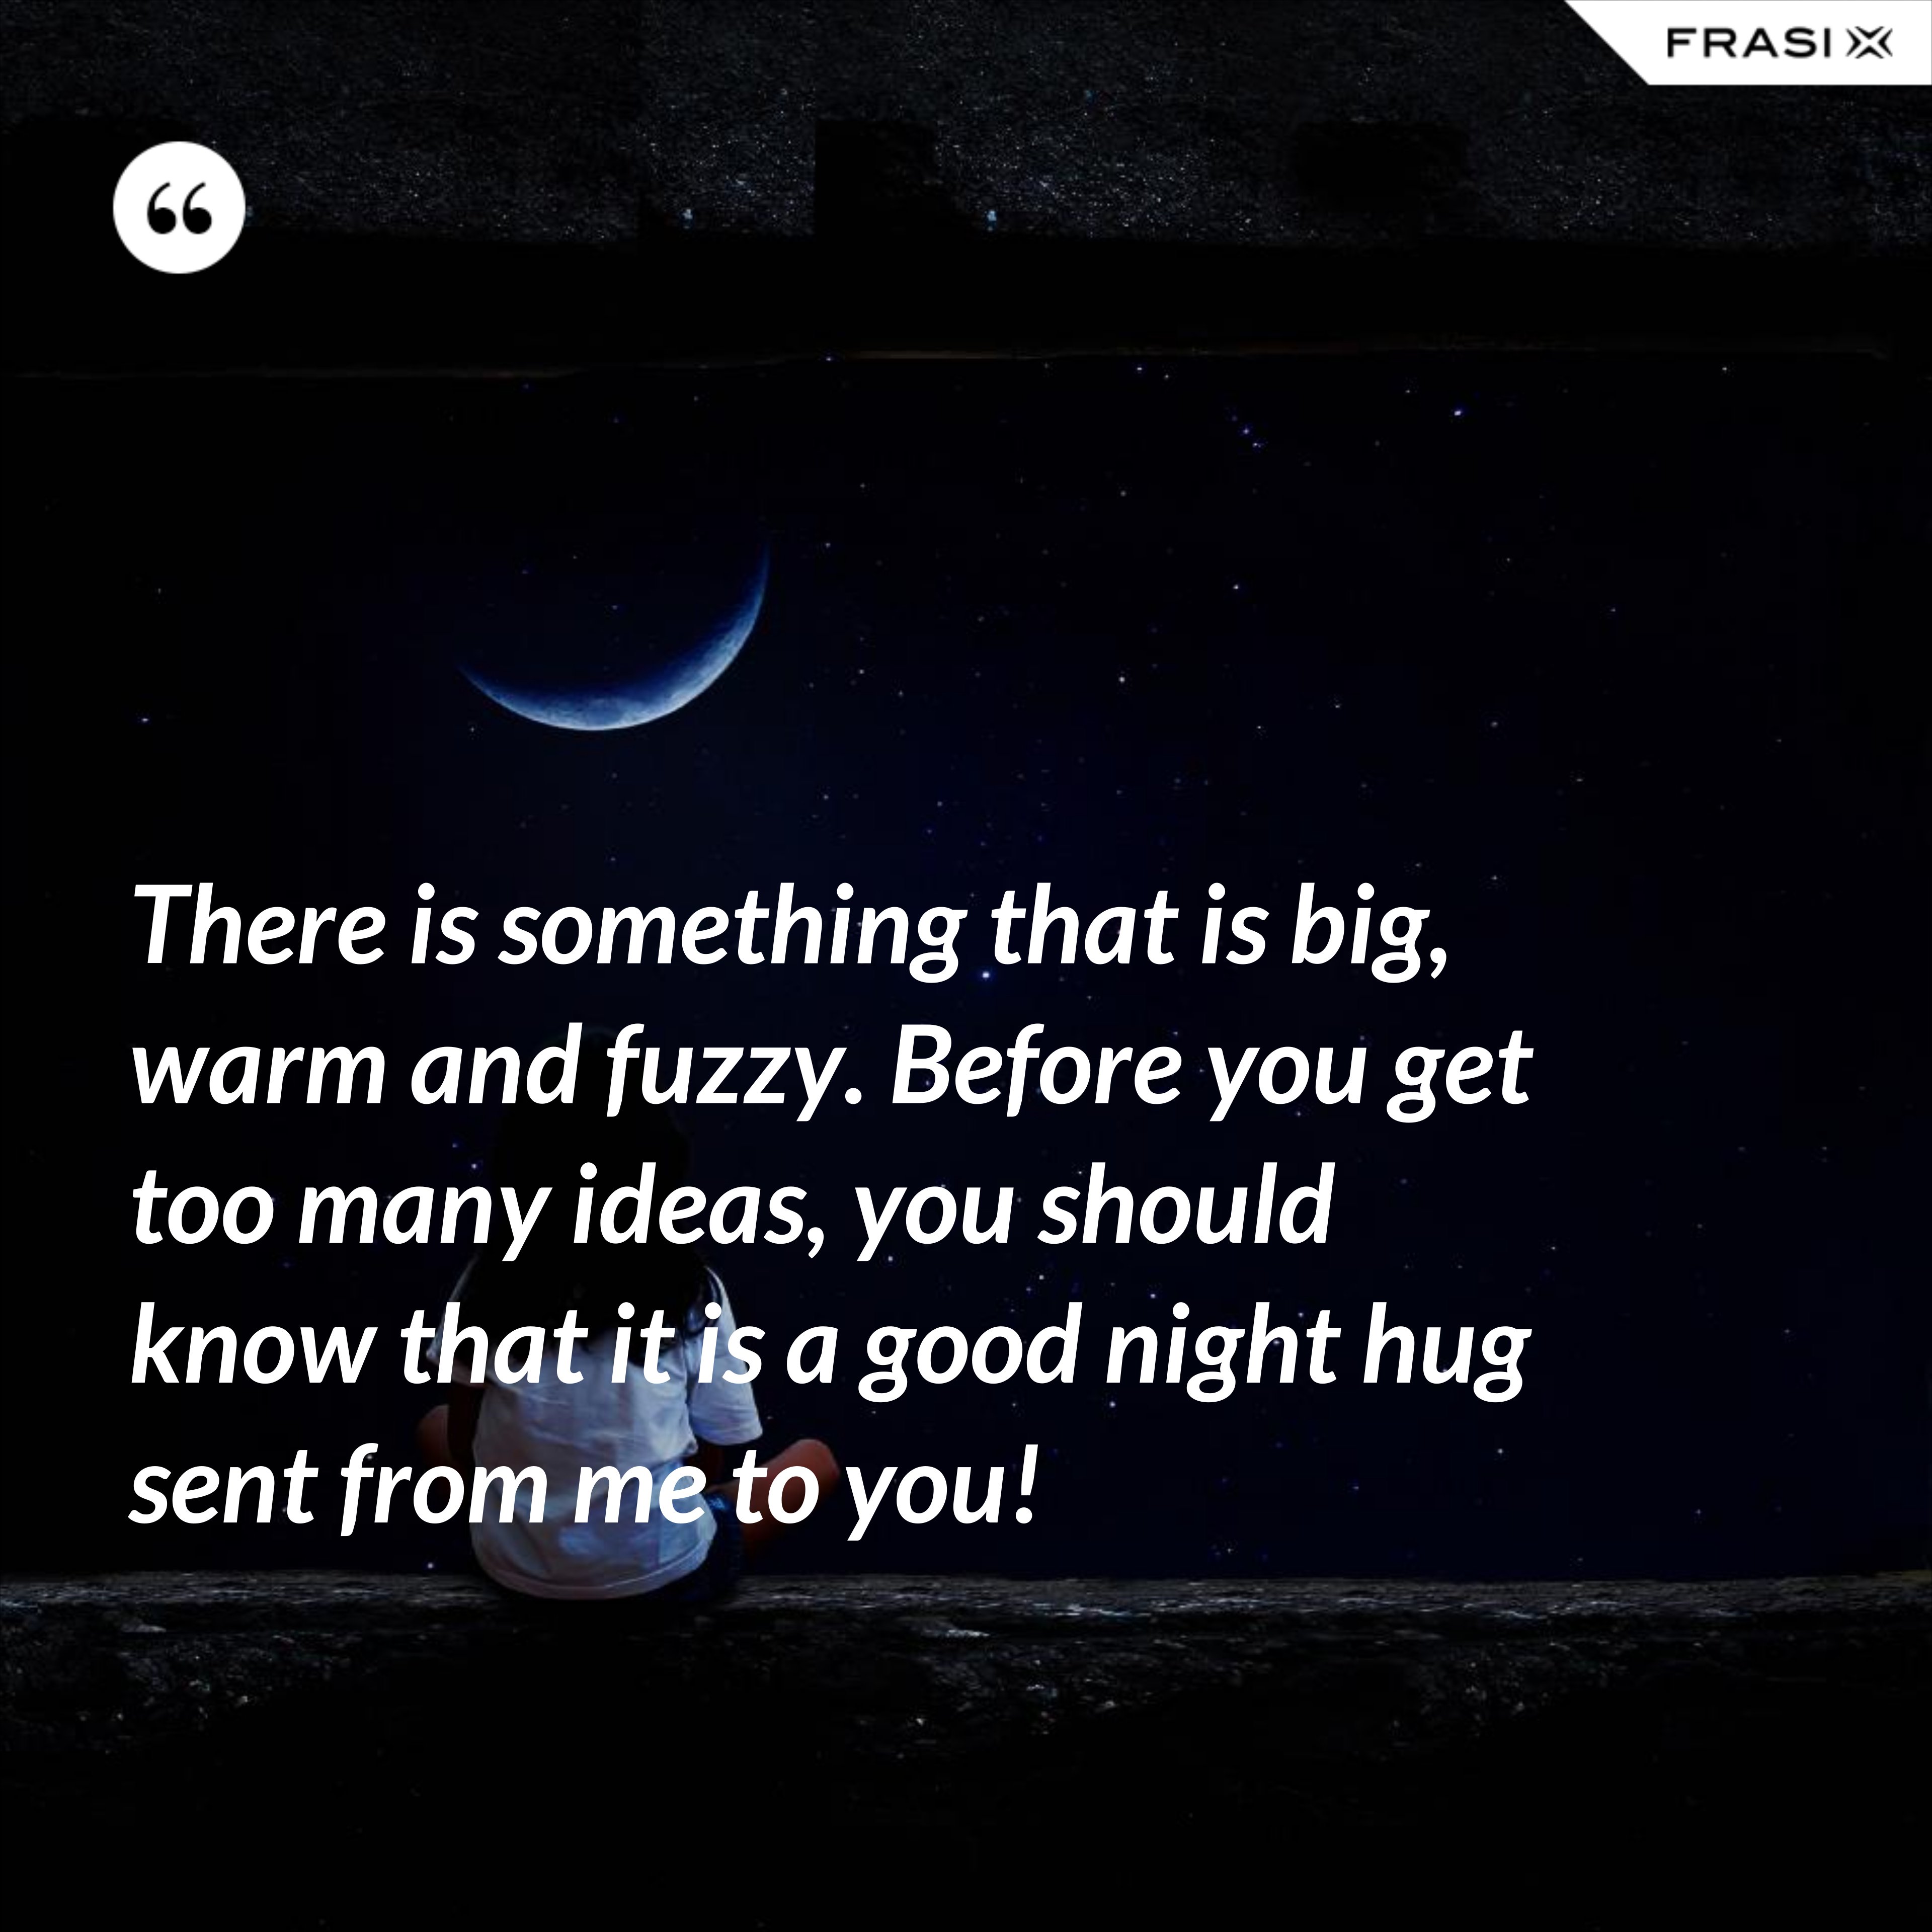 There is something that is big, warm and fuzzy. Before you get too many ideas, you should know that it is a good night hug sent from me to you! - Anonimo